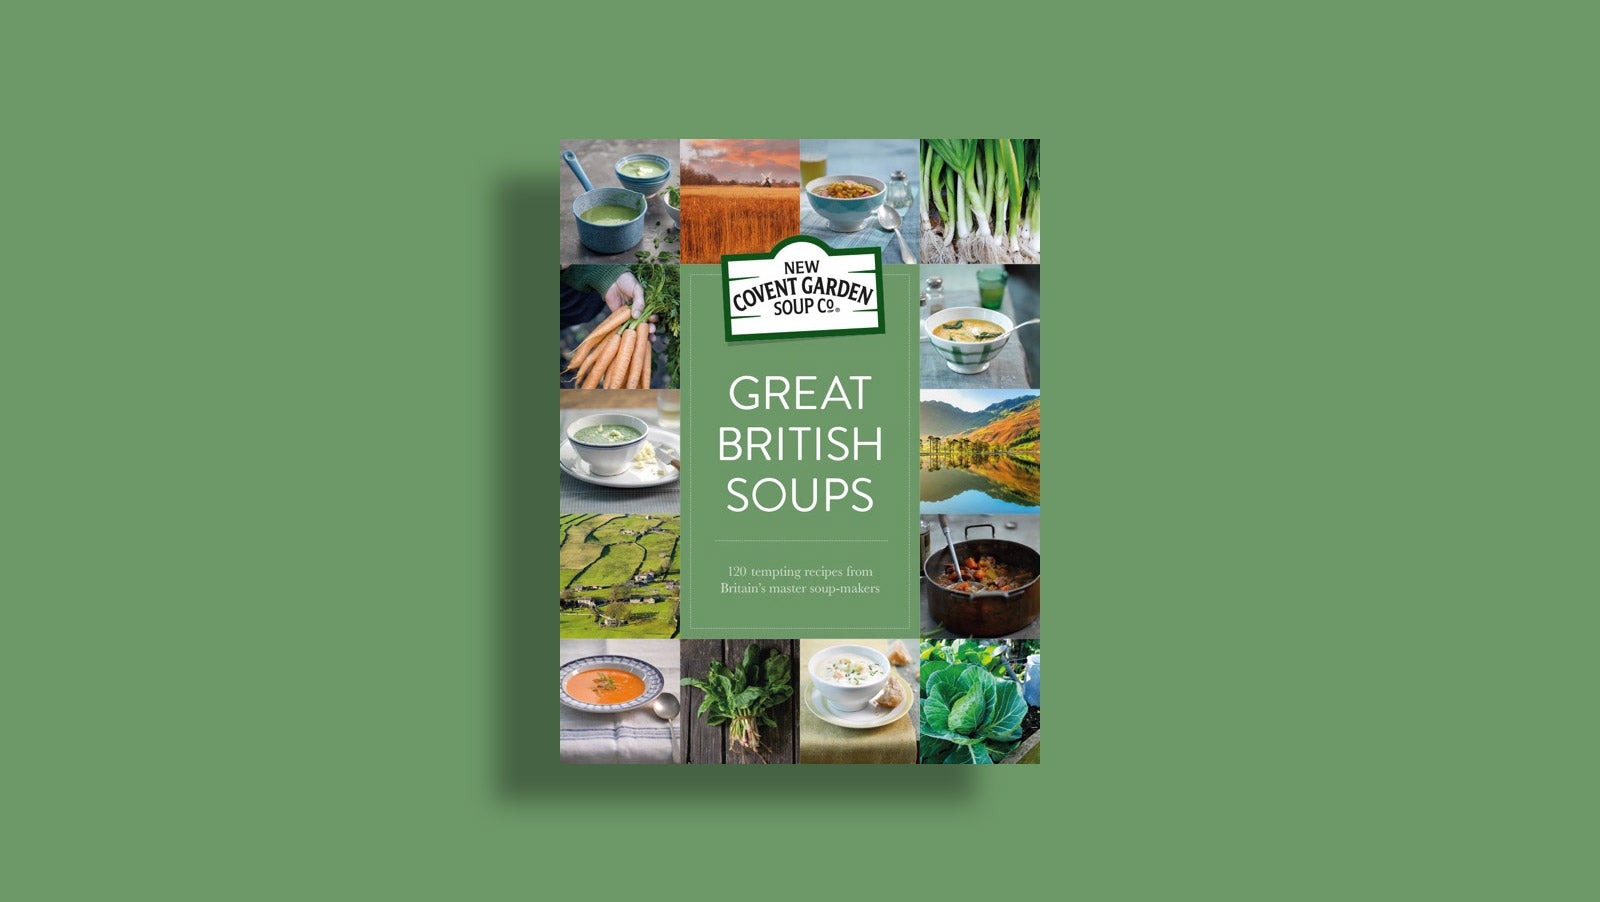 Great British Soups cookbook cover against a green background